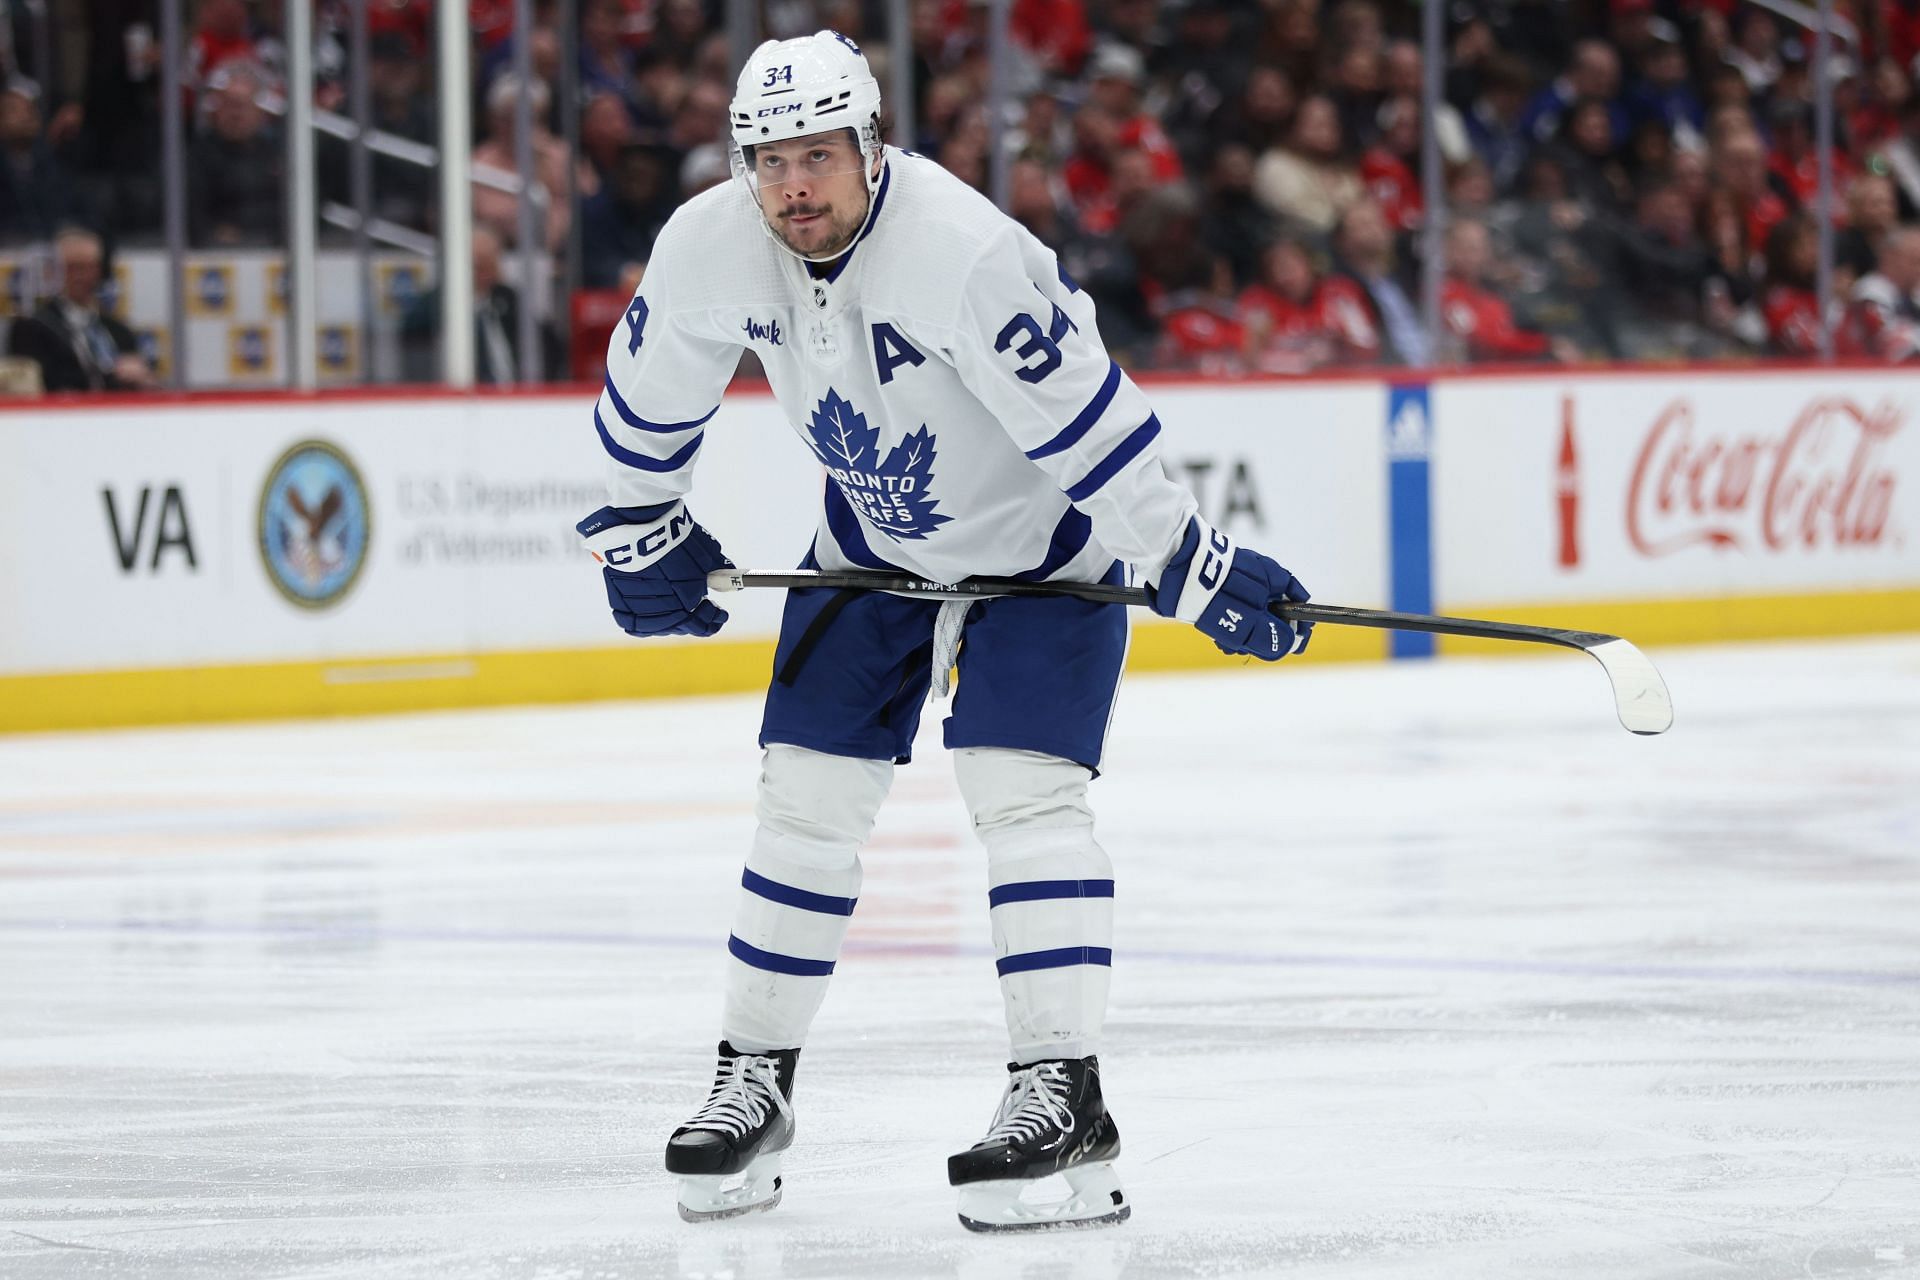 Toronto Maple Leafs seem likely to lose in the first round